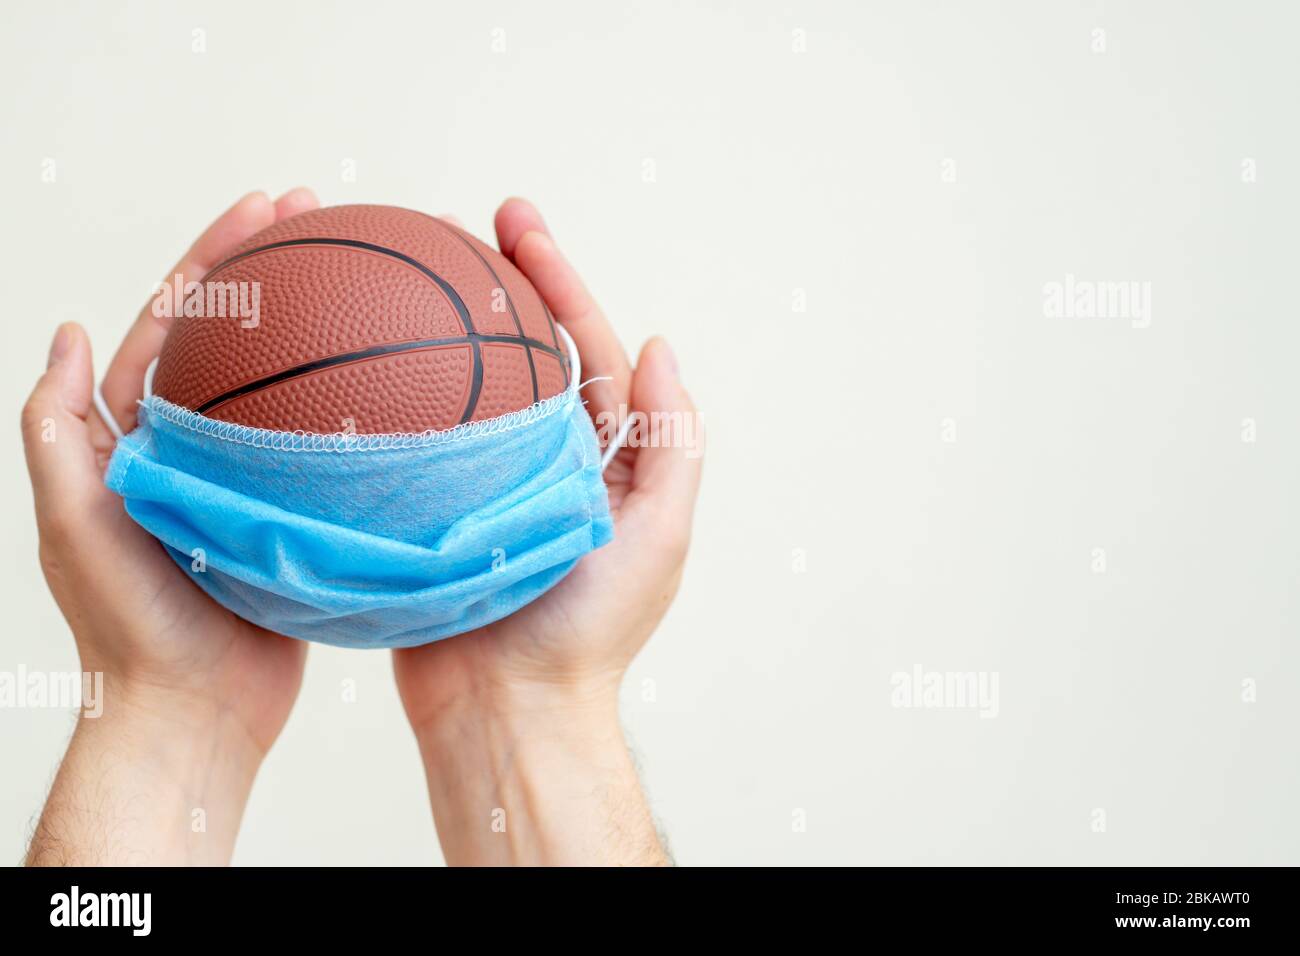 Basketball ball with medical mask in man hands on white background. Stock Photo